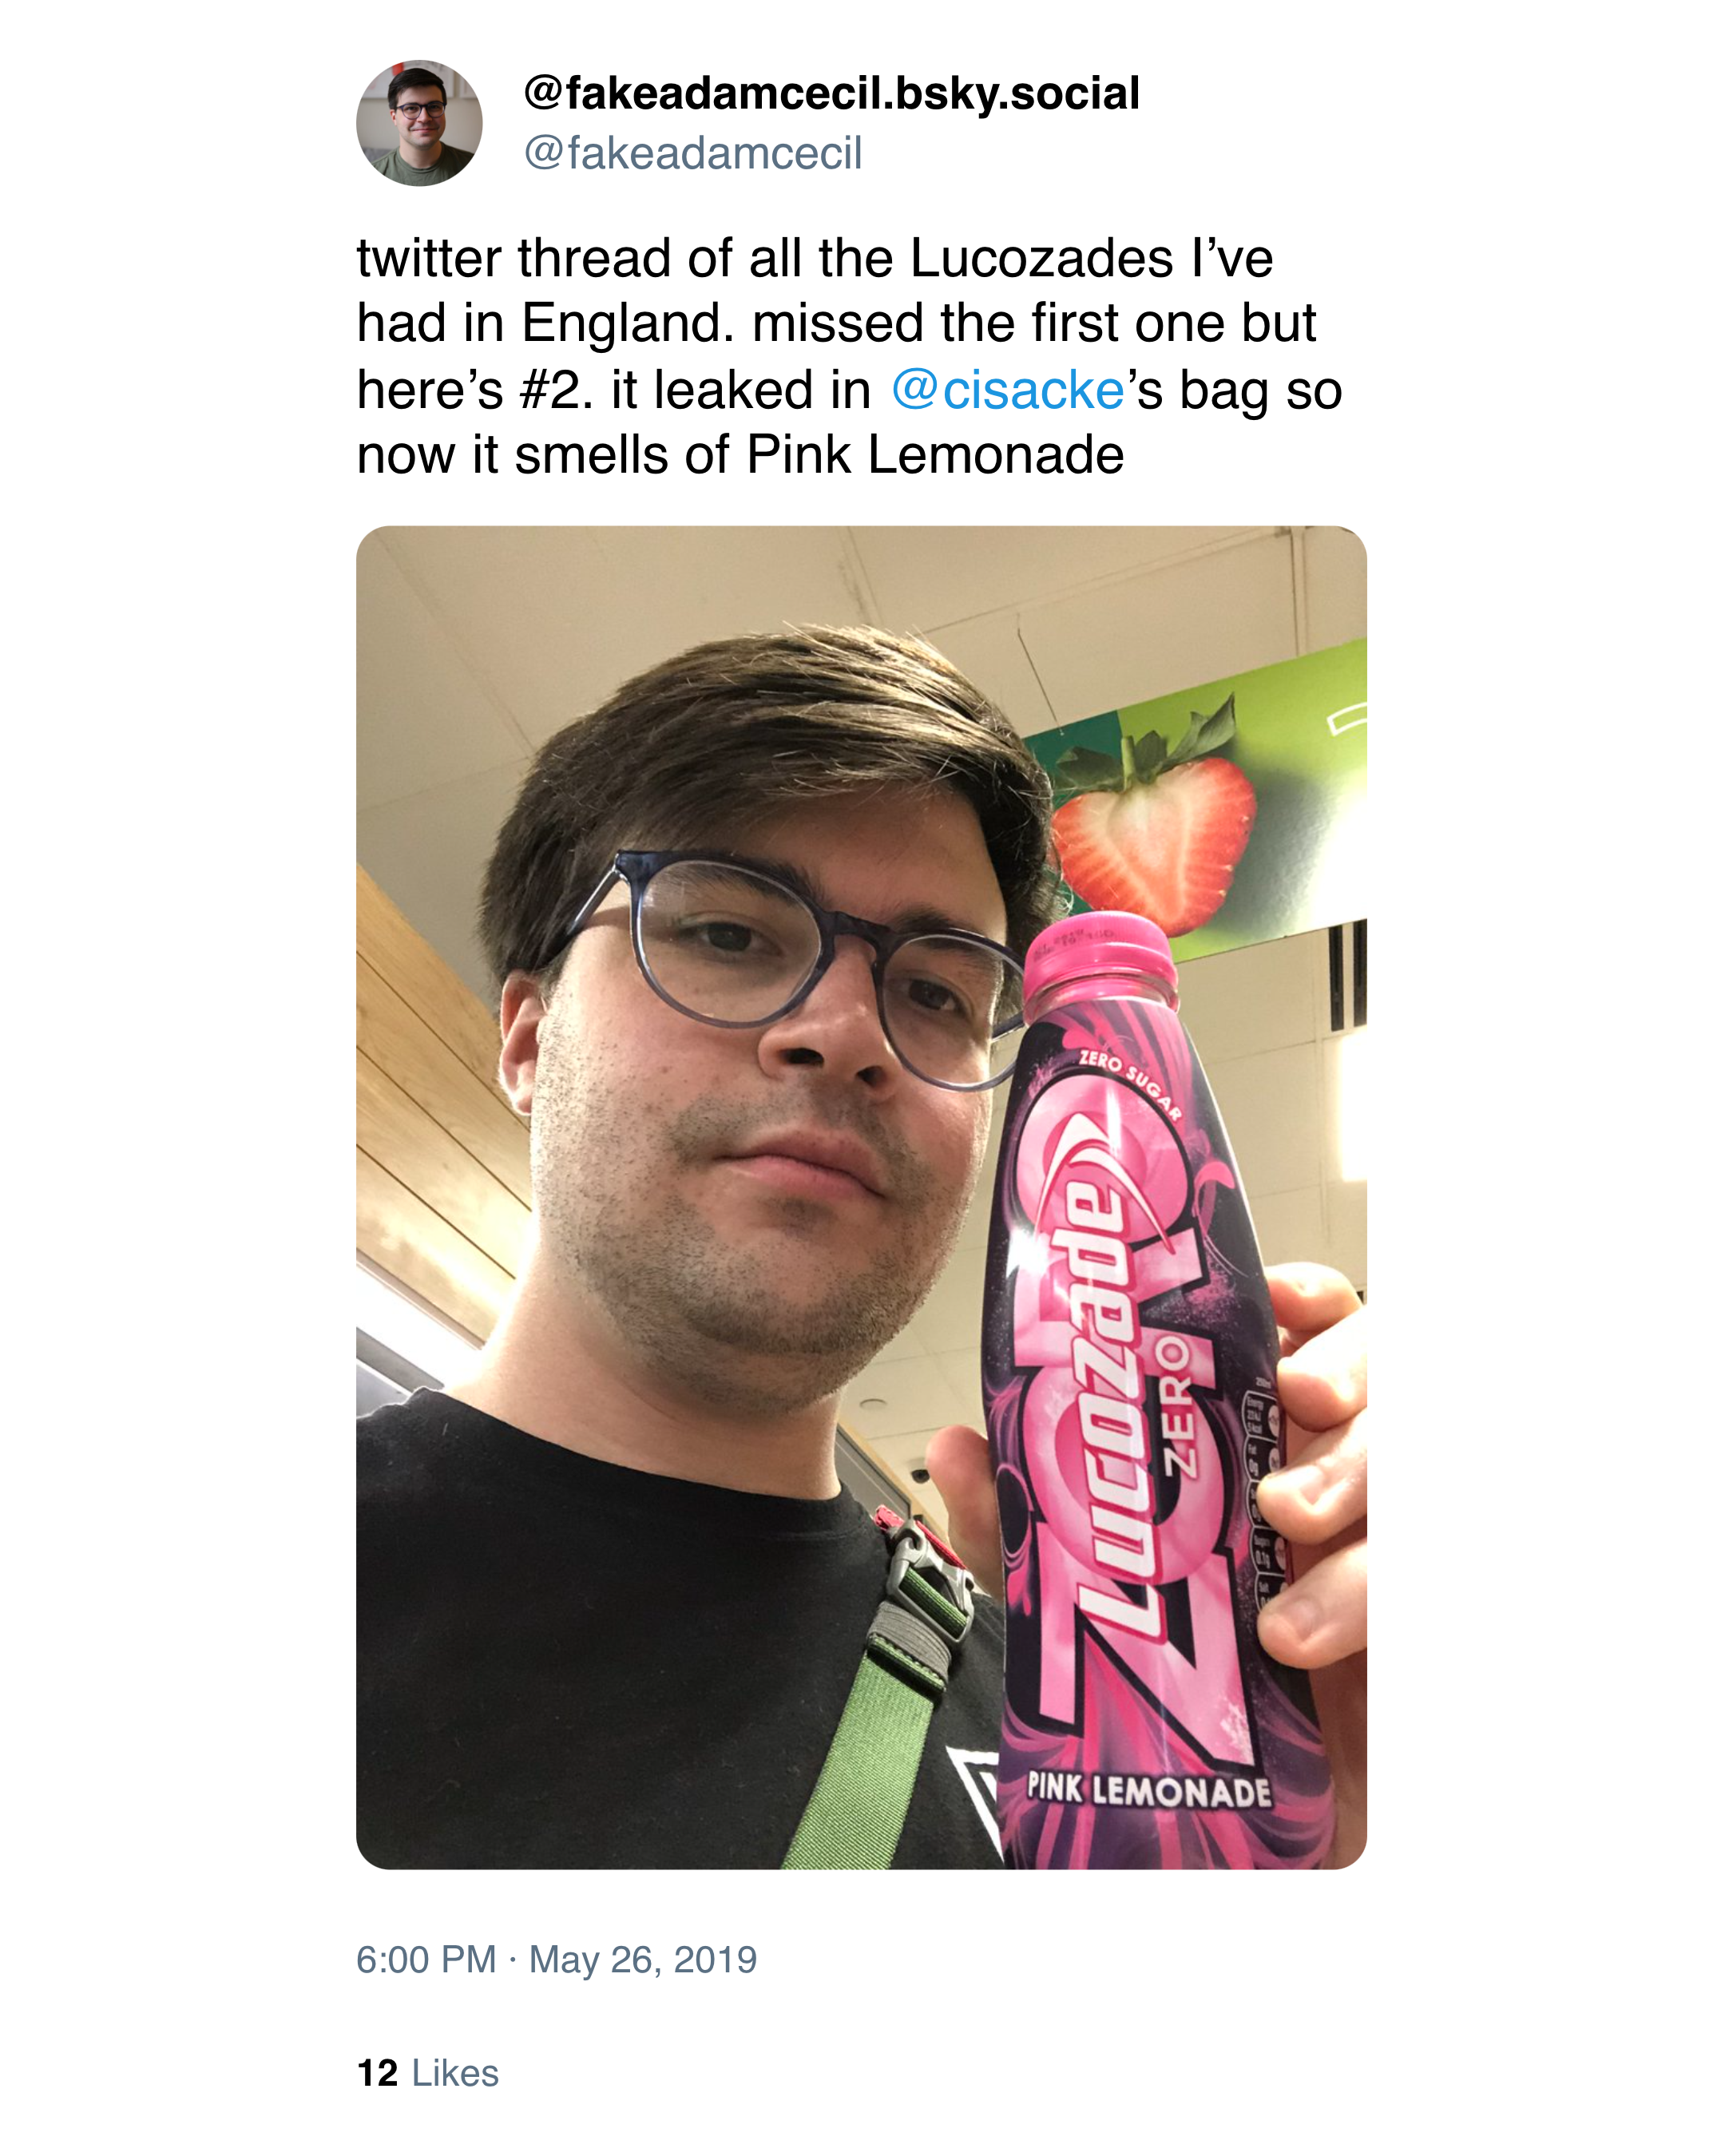 @fakeadamcecil on Twitter: "twitter thread of all the Lucozades I've had in England. missed the first one but here's #2. it leaked in @cisacke's bag so now it smells of Pink Lemonade"